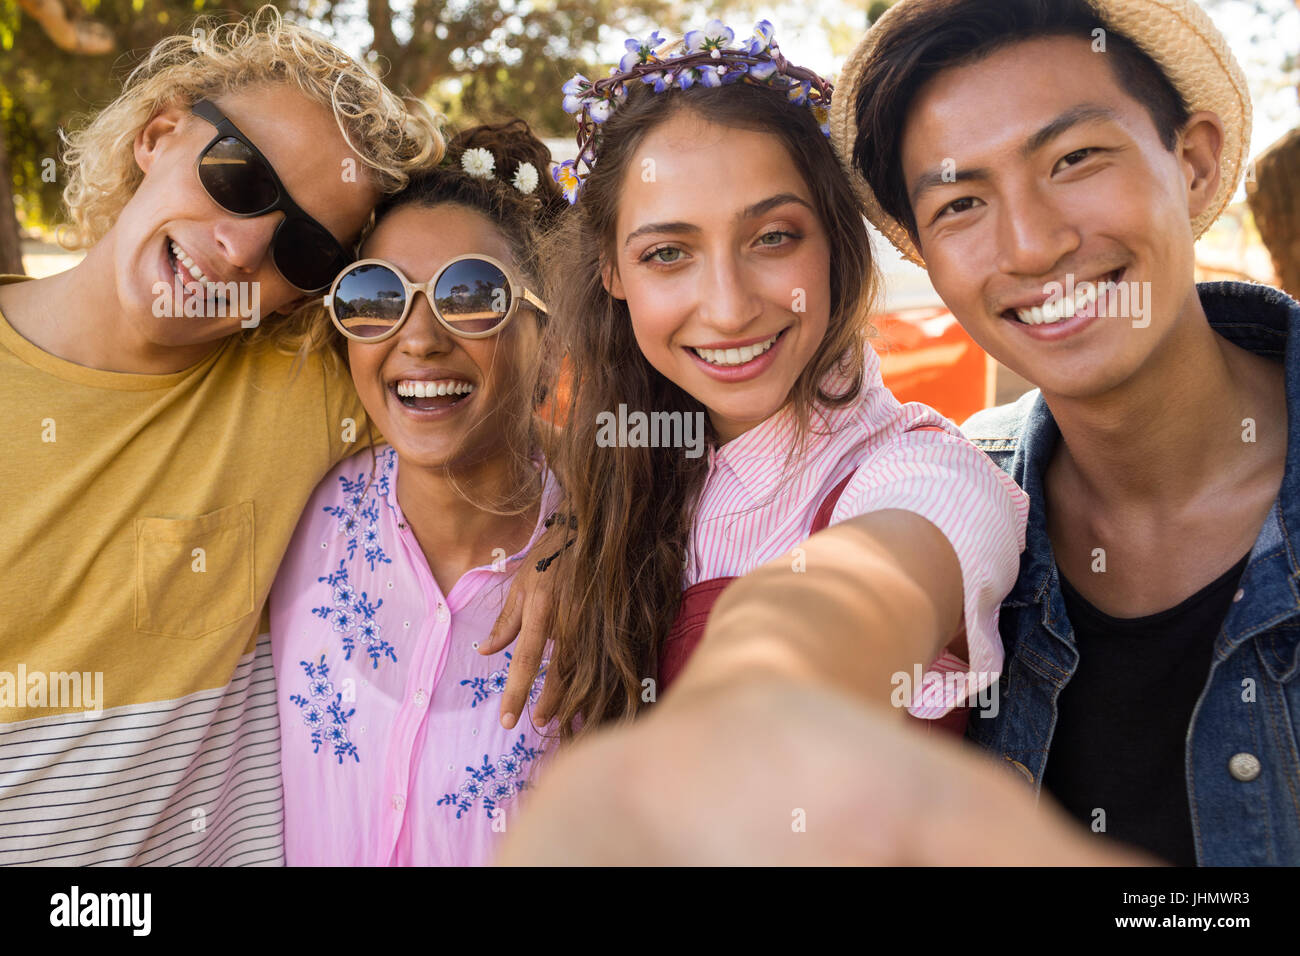 Close up portrait of smiling friends standing side by side Stock Photo